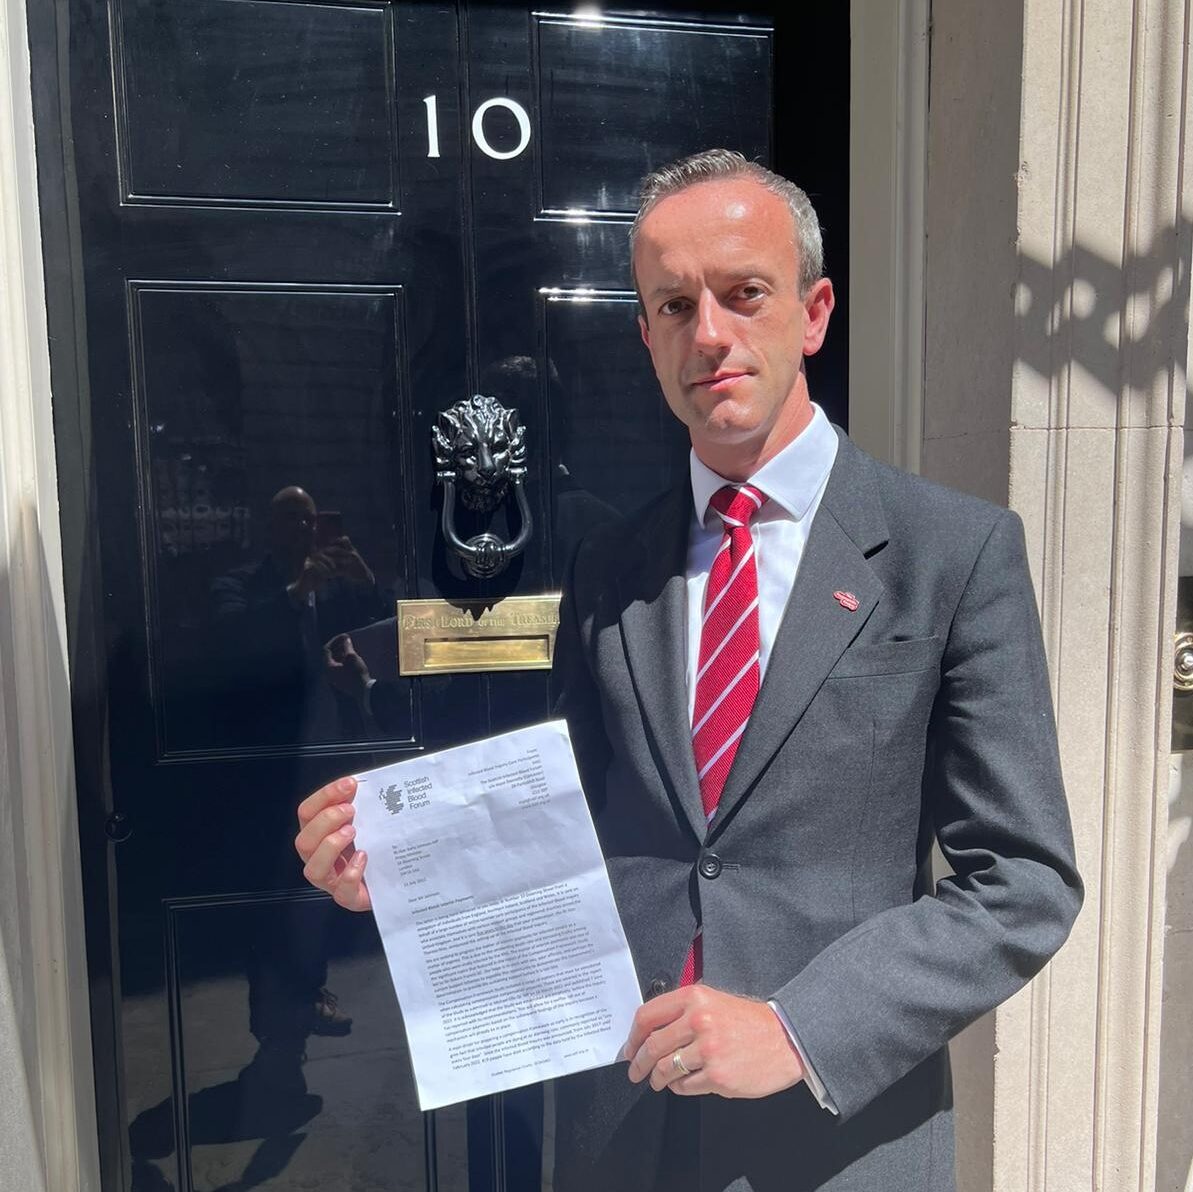 Clive Smith at 10 Downing Street calling for interim compensation